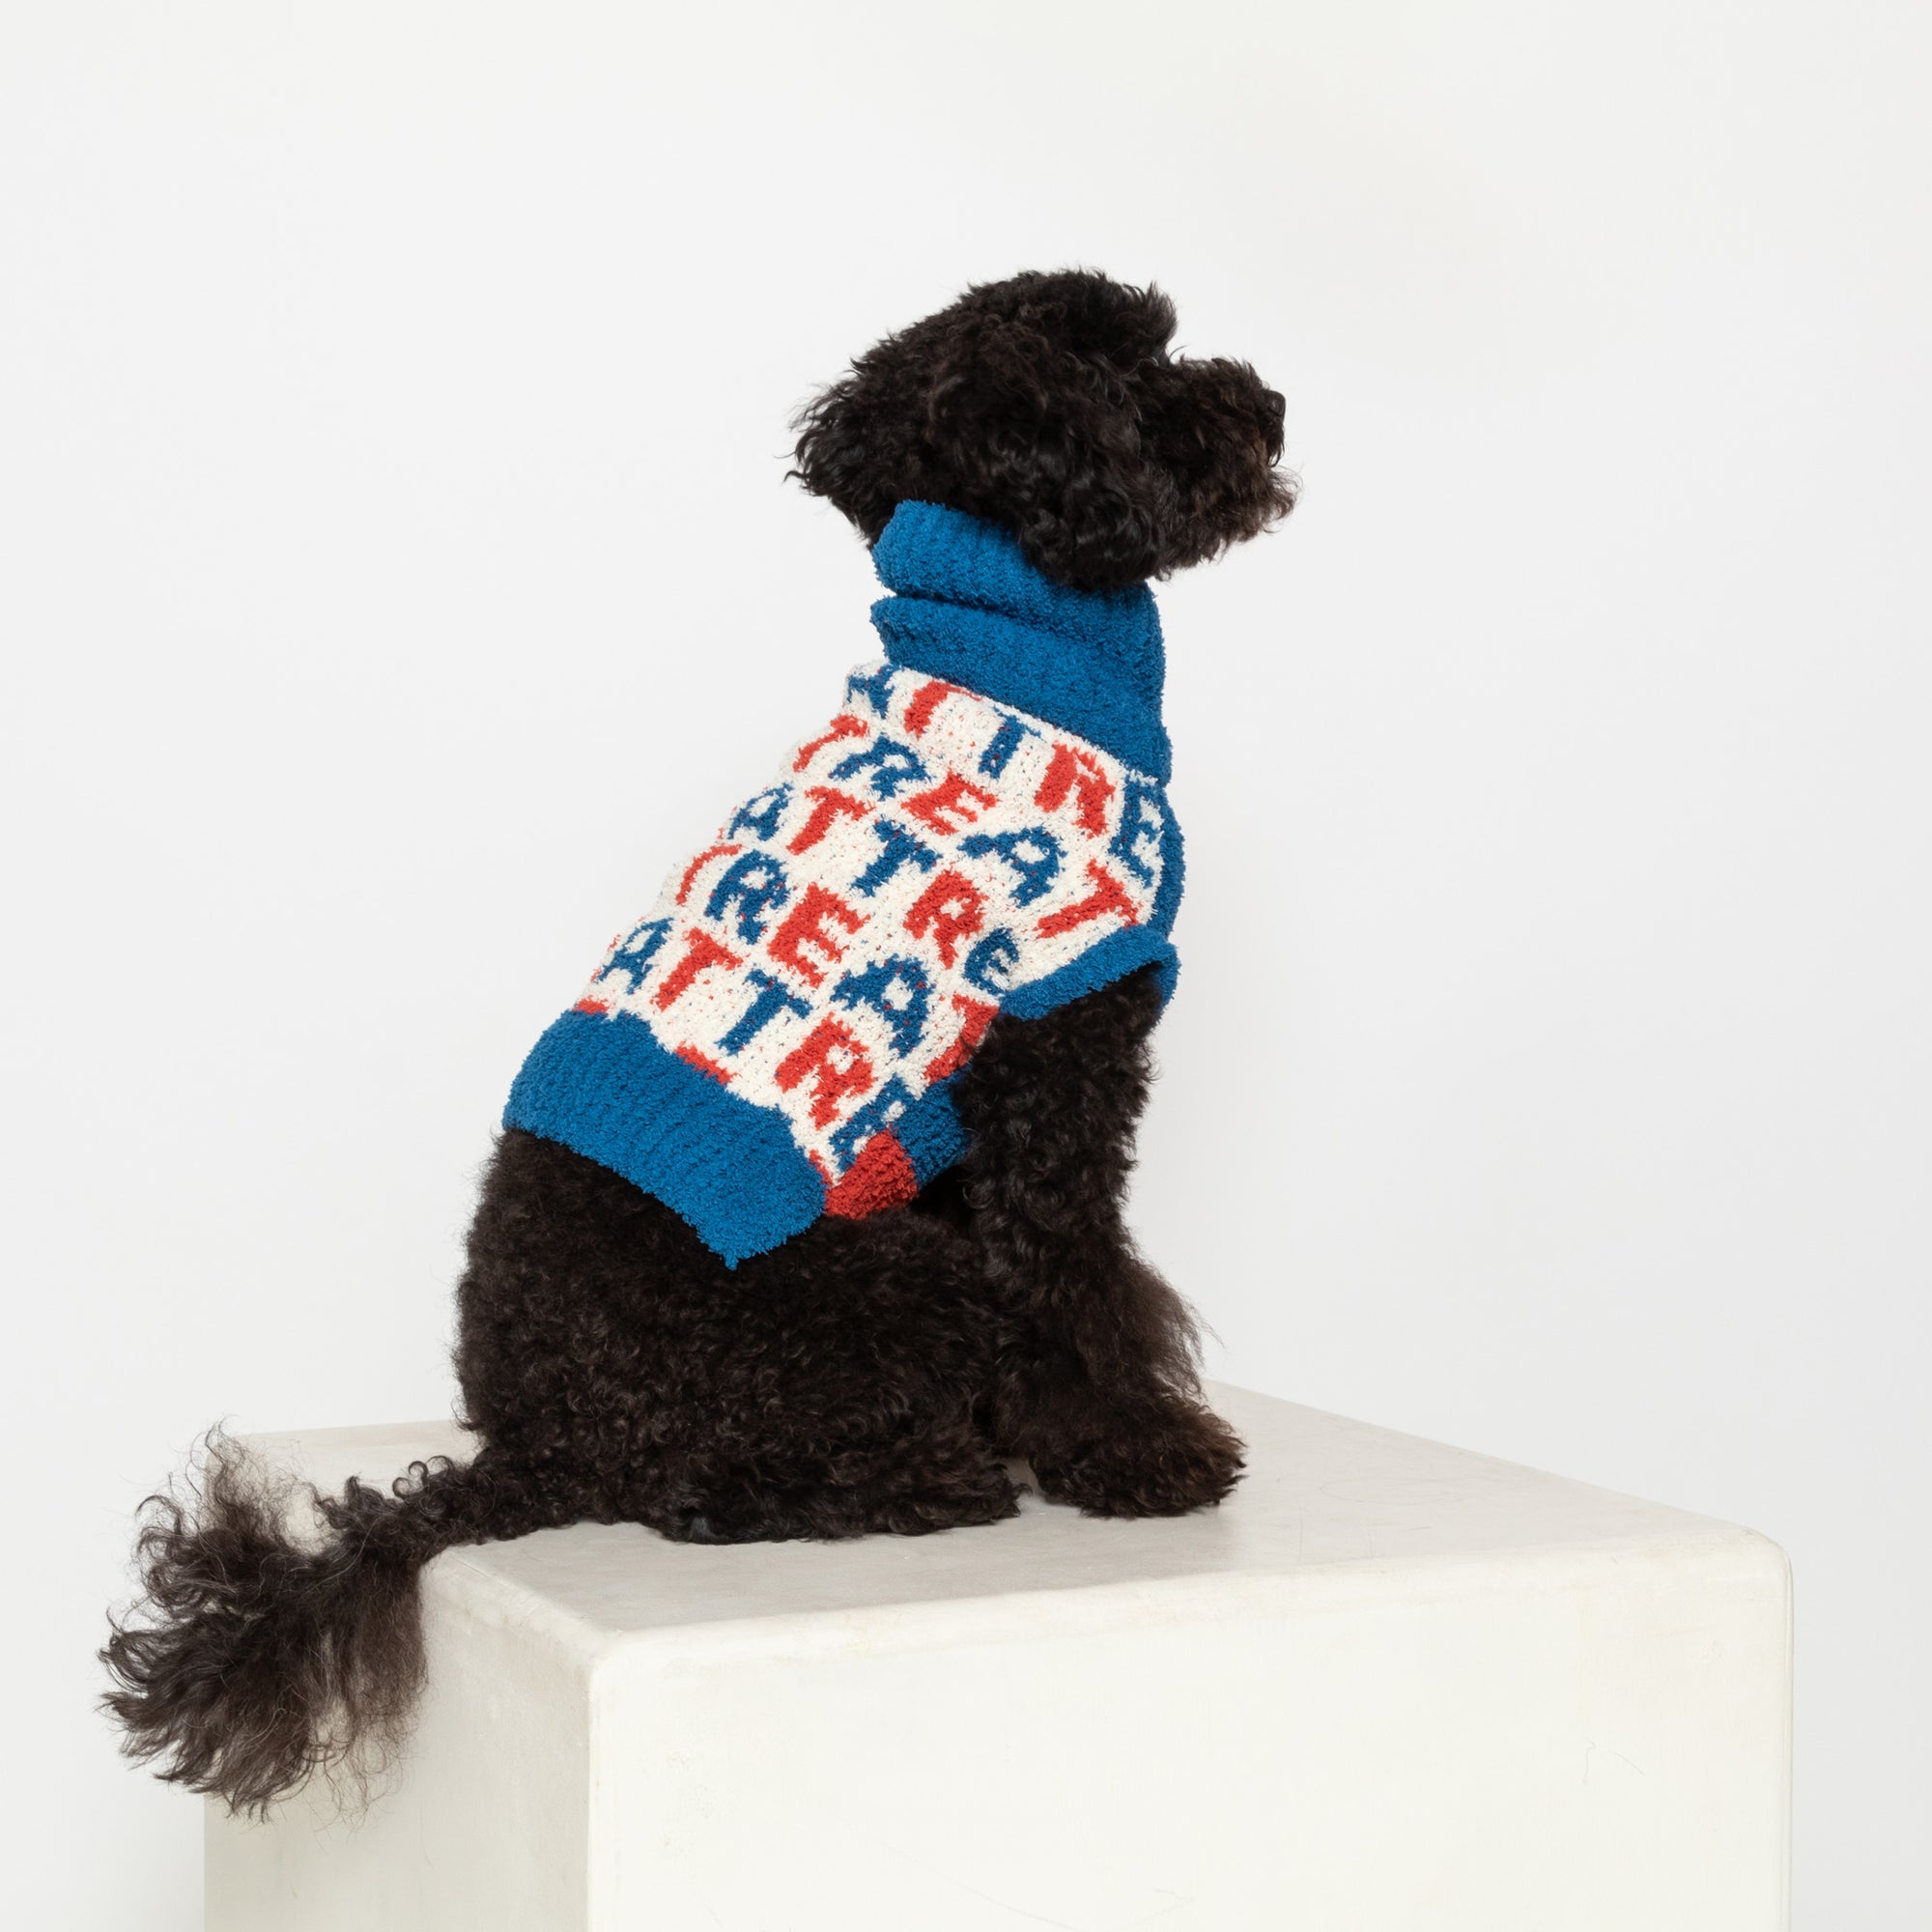 A small black poodle, with a glossy curly coat, sits elegantly wearing a blue turtleneck sweater featuring a whimsical "Treat" pattern in red and white, a cozy garment that complements its size M frame.